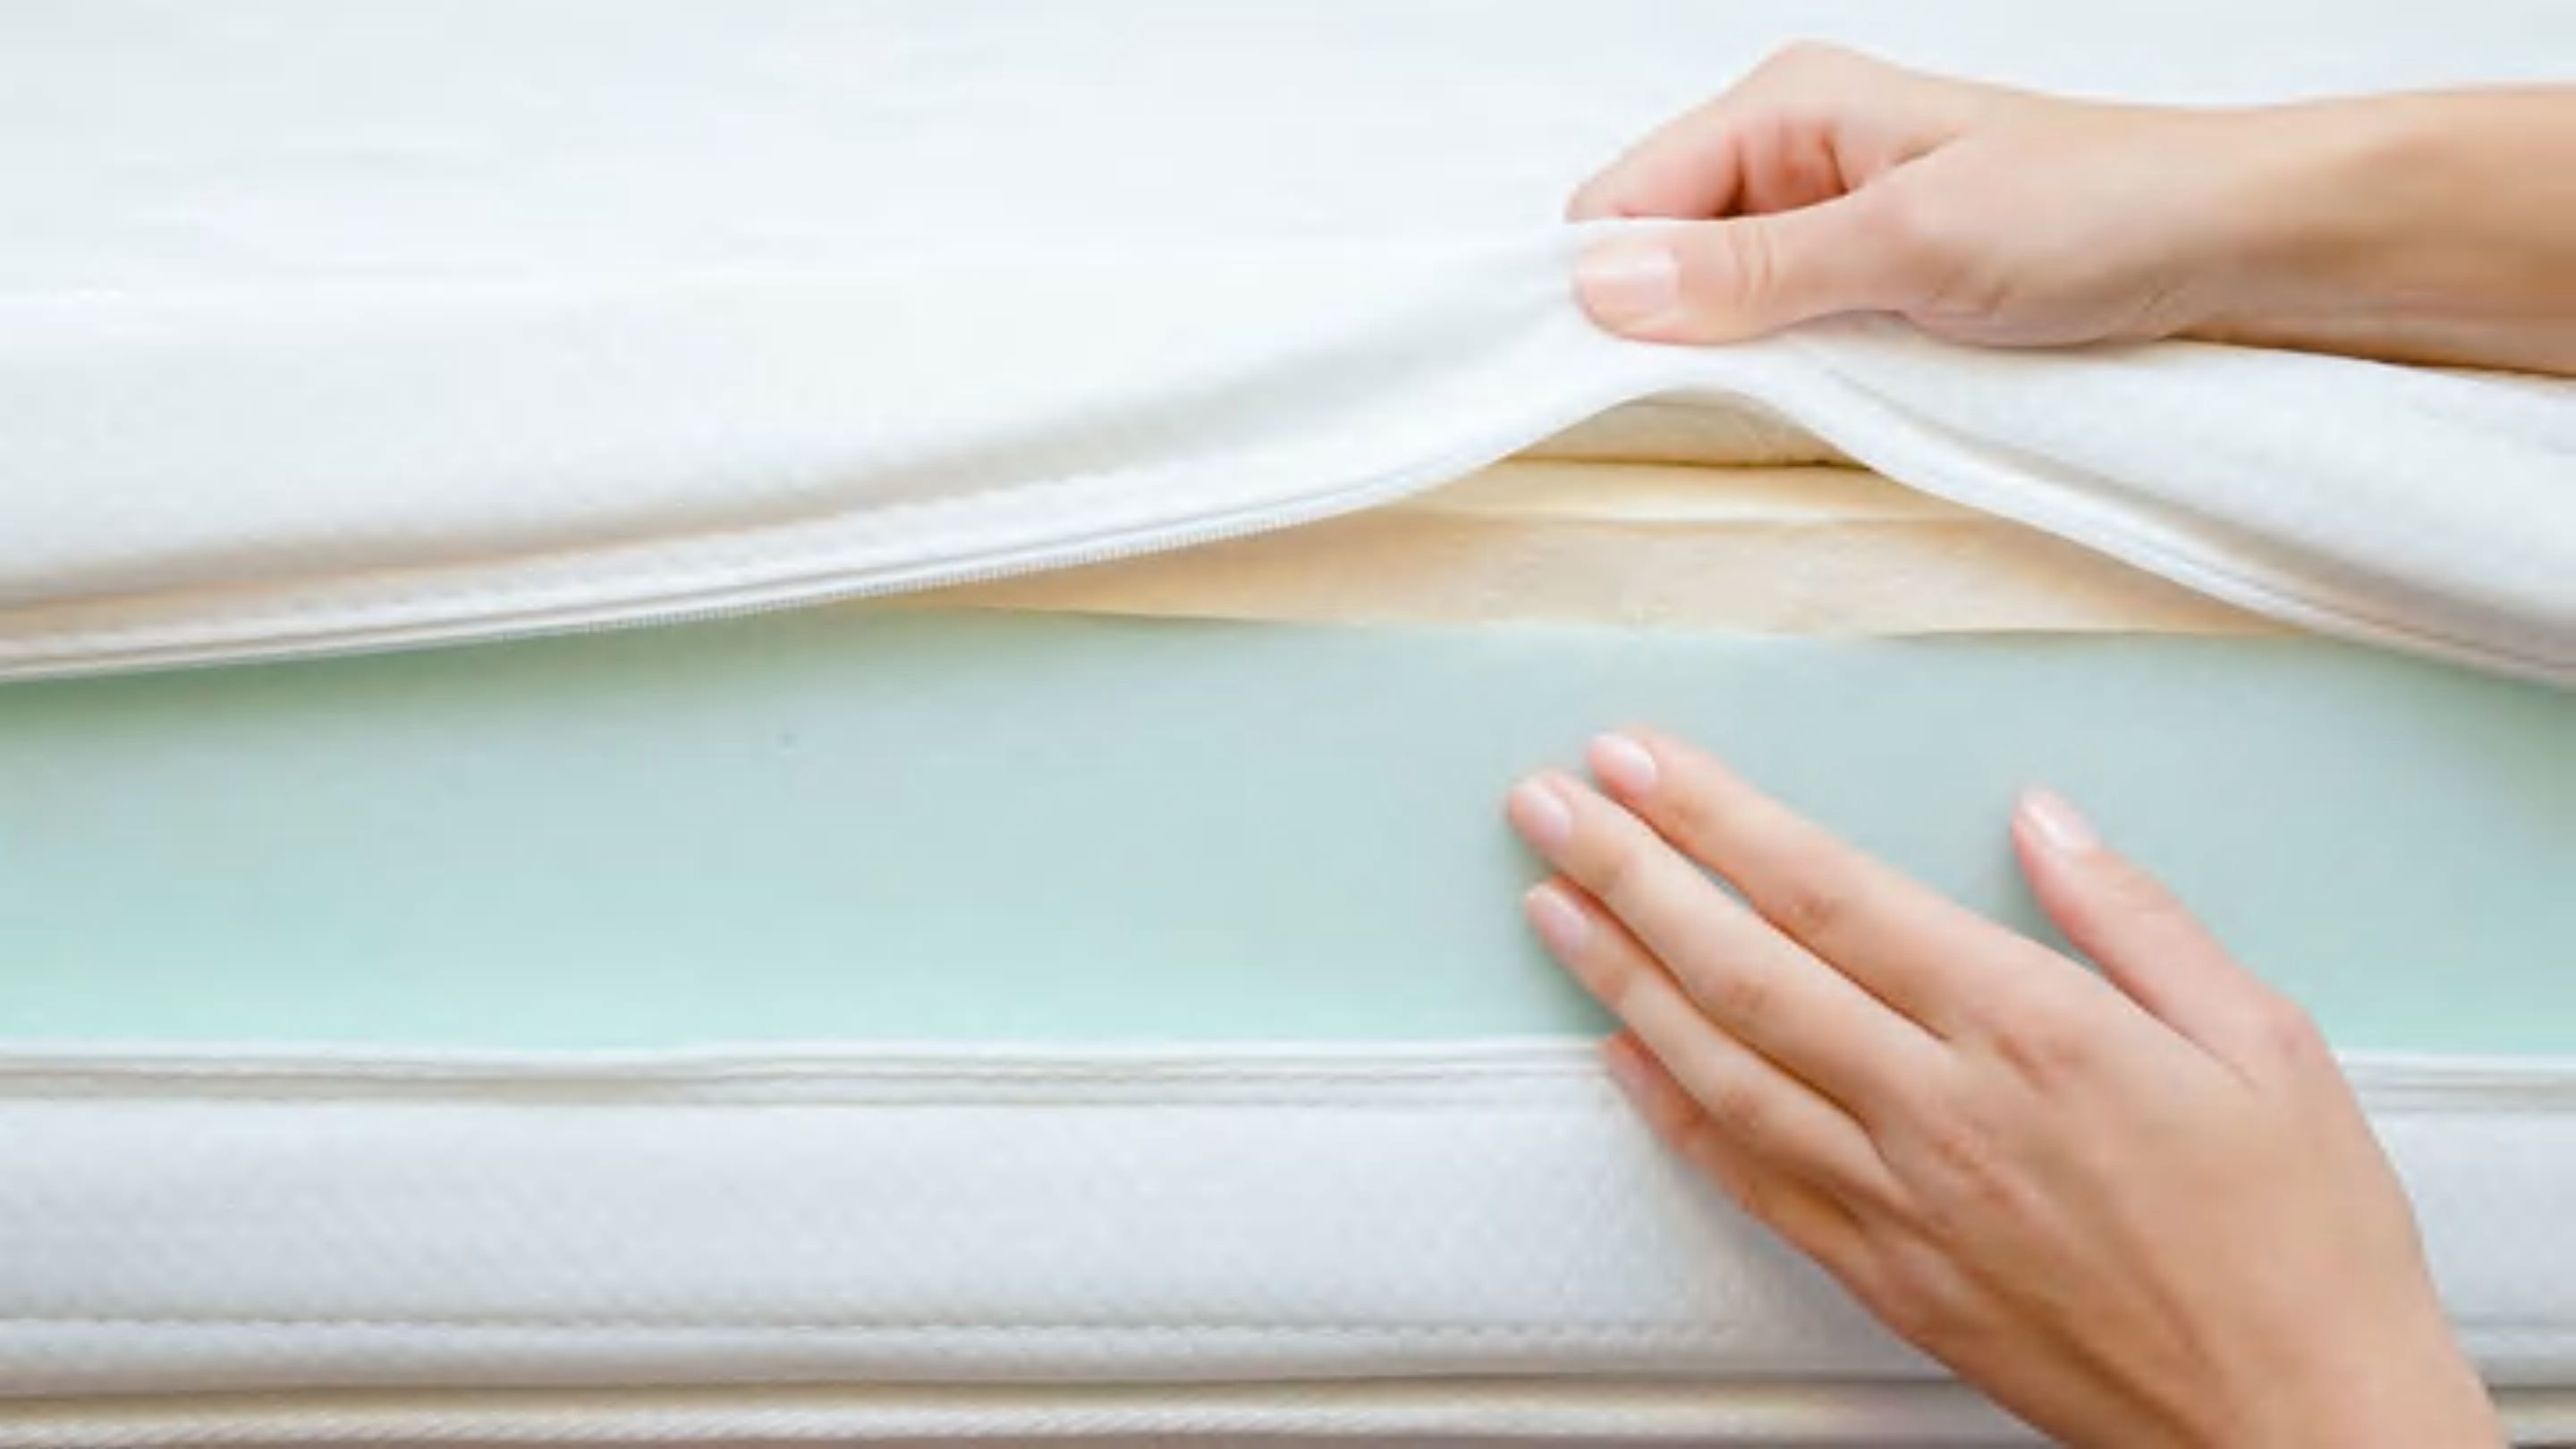 Here's What Happens to Returned Mail-Order Mattresses